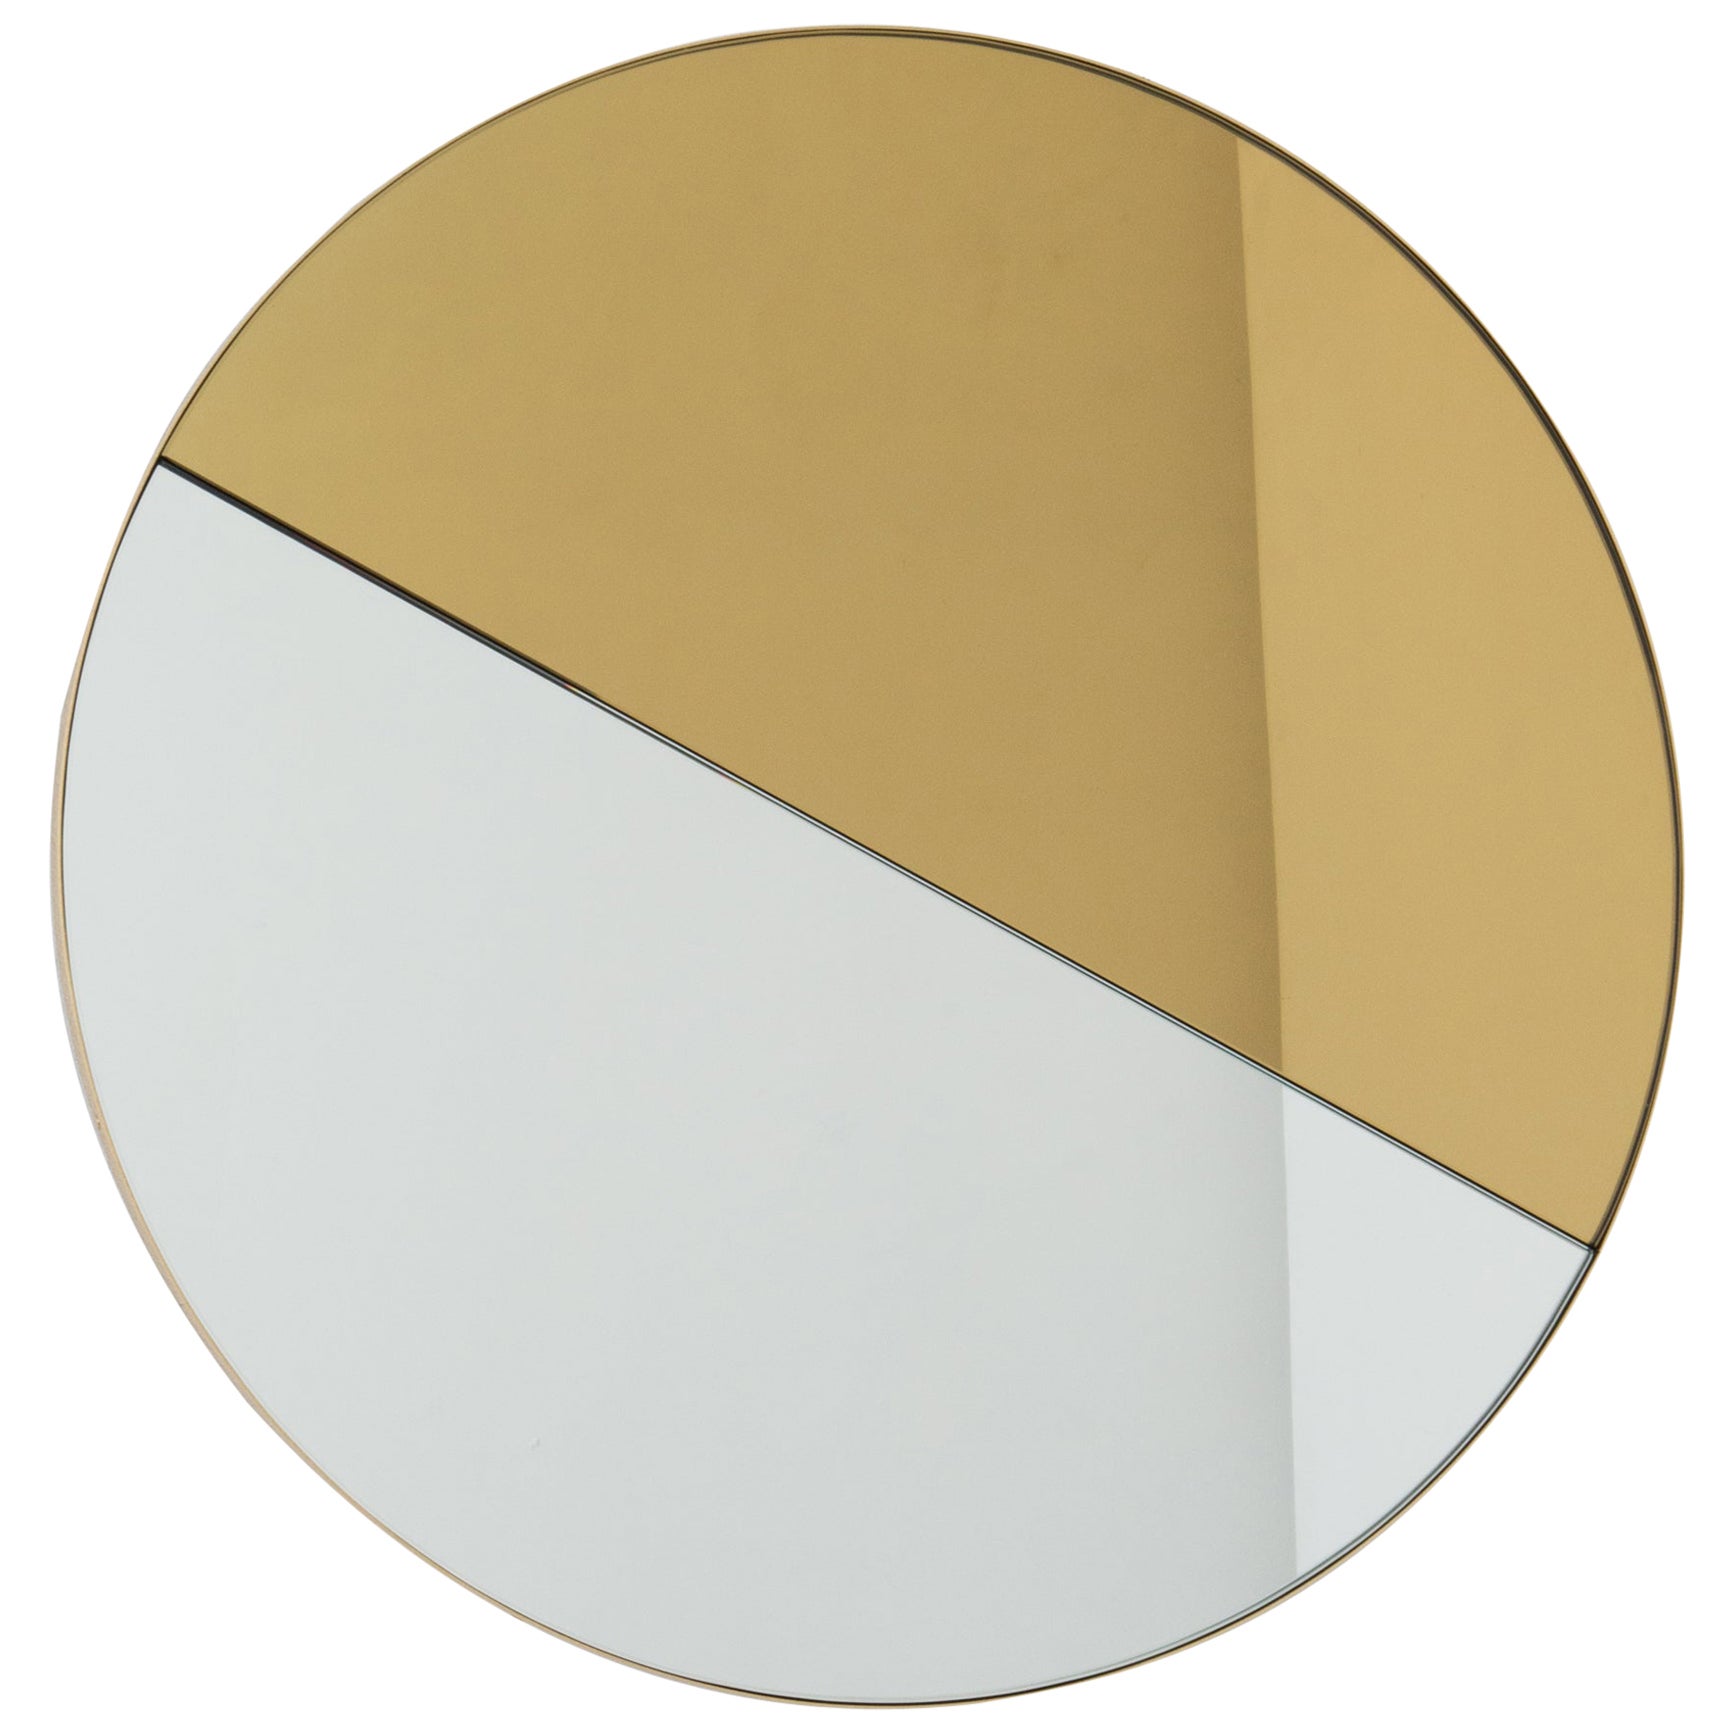 Orbis Dualis Round Mixed Gold and Silver Tinted Mirror with Brass Frame, Large For Sale